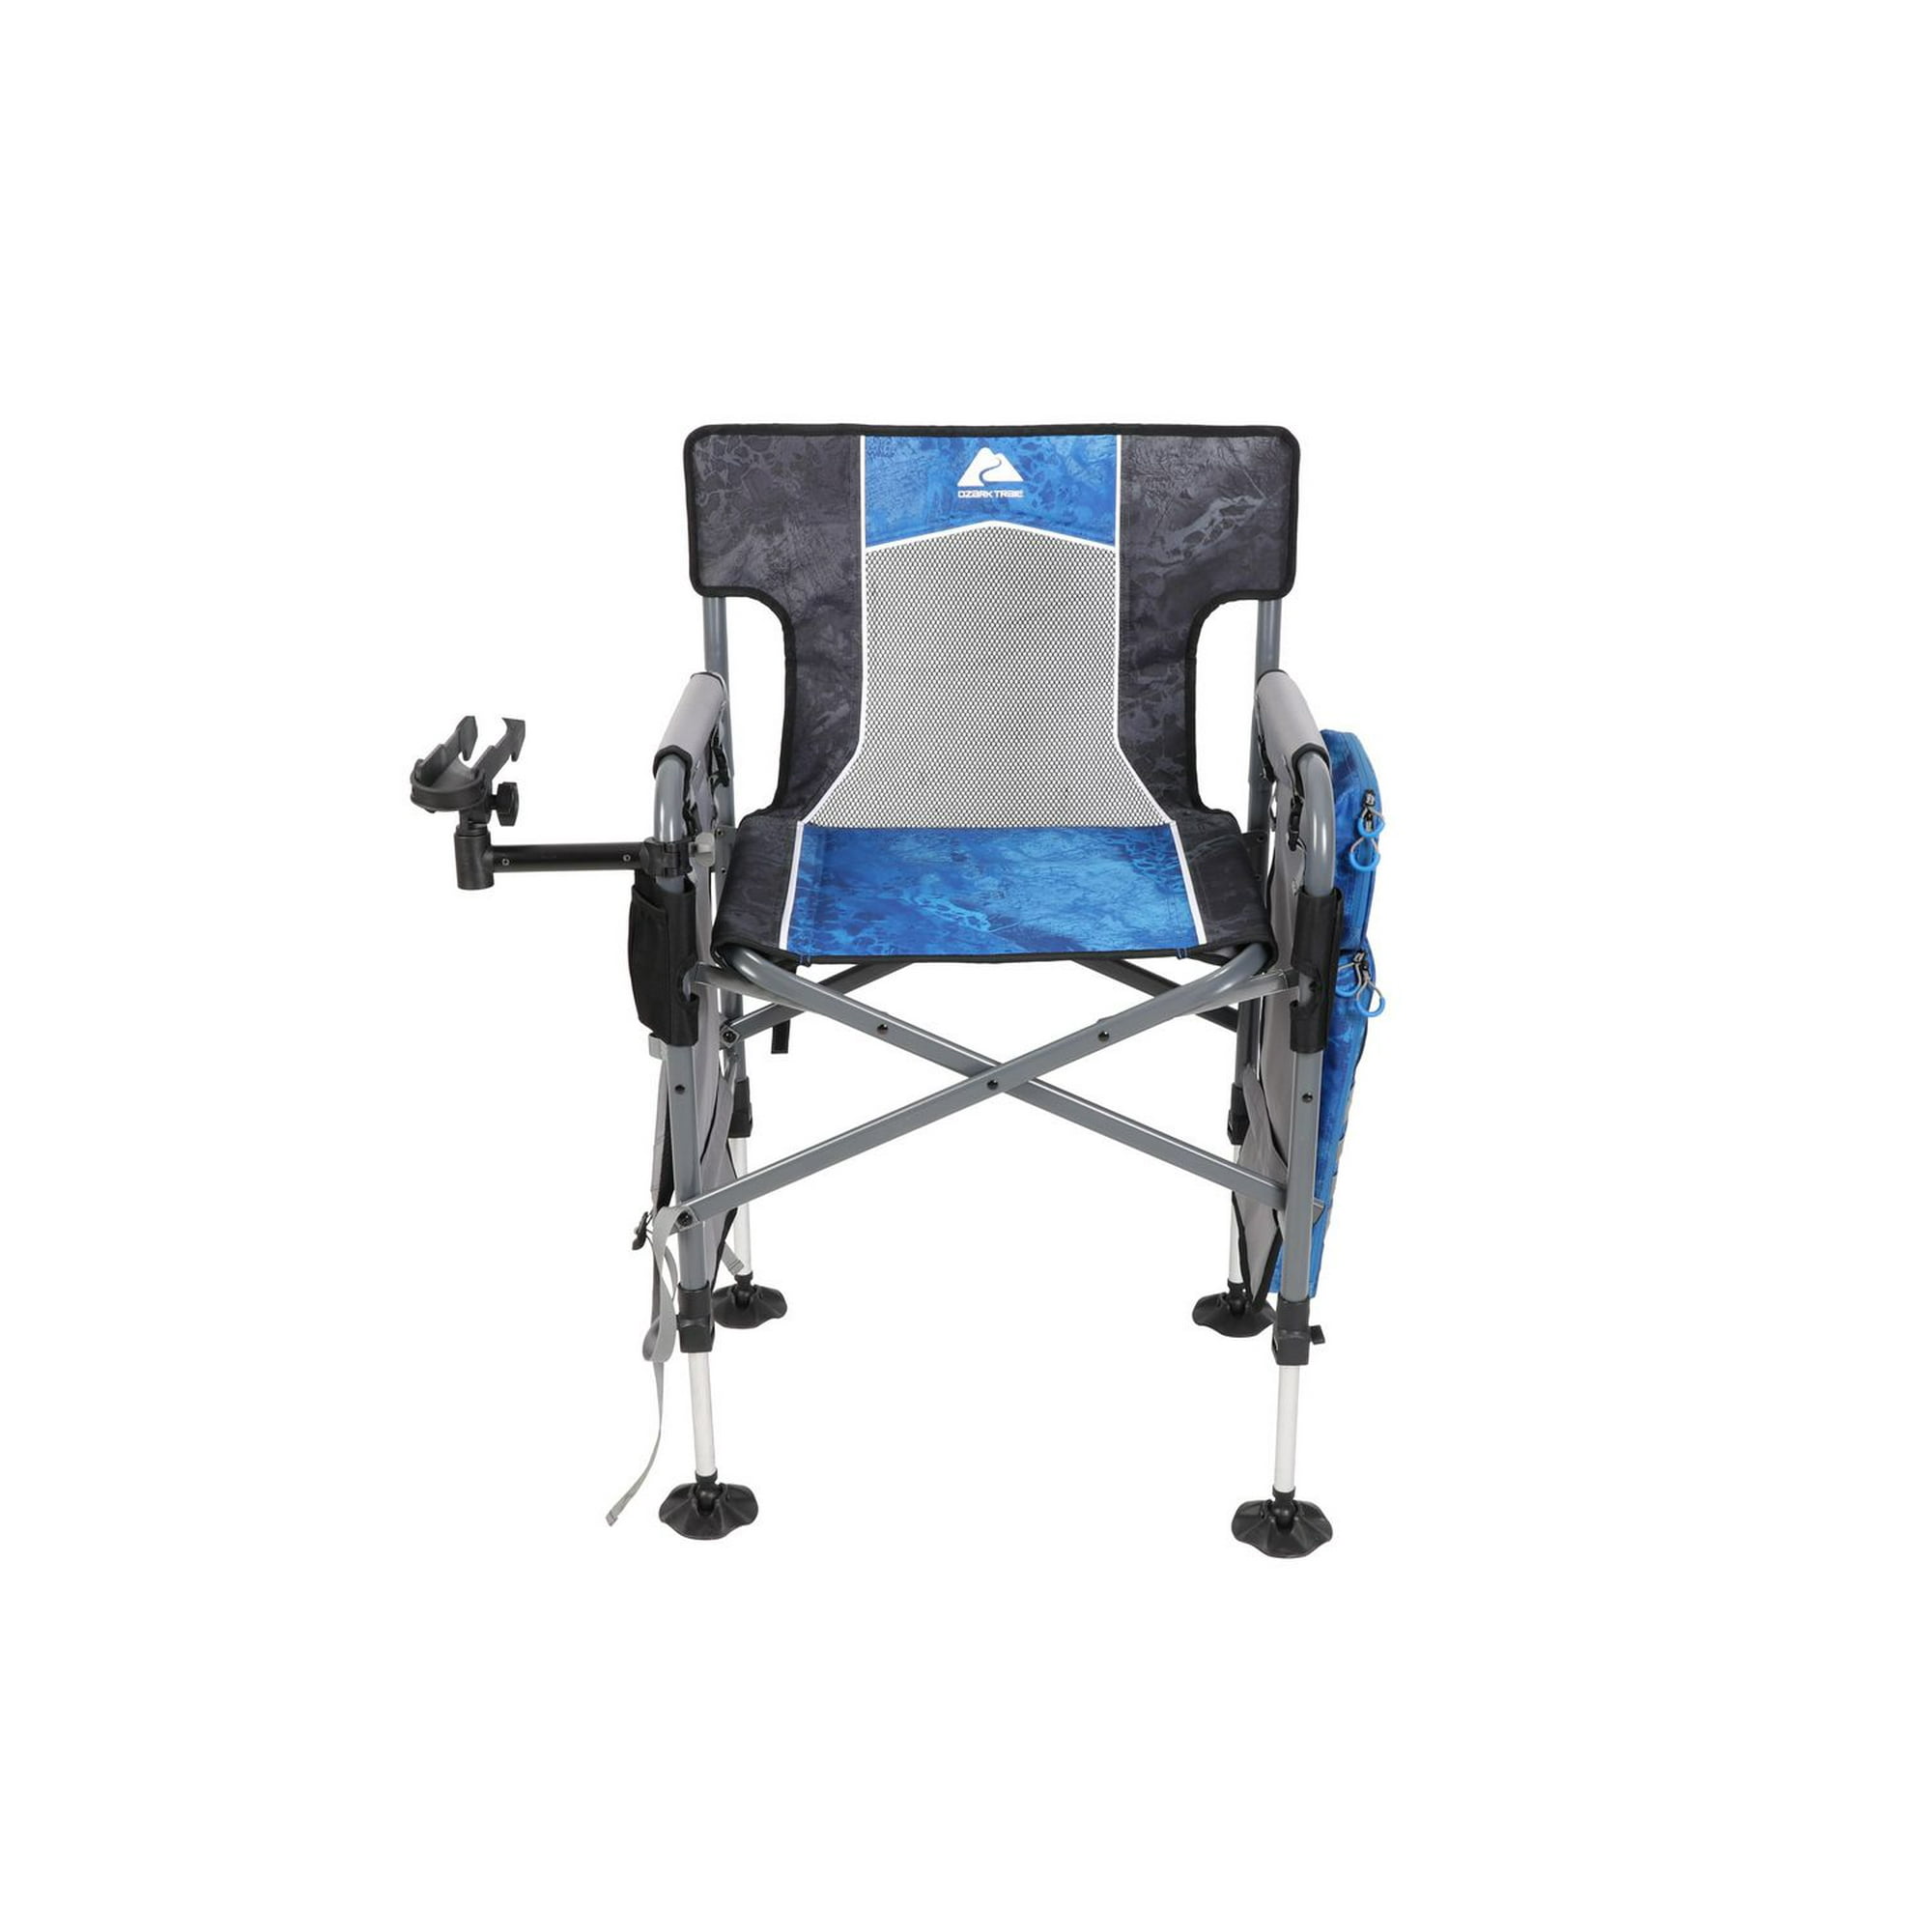 LEADALLWAY Folding Fishing Chair with Rod Holder,Camouflage